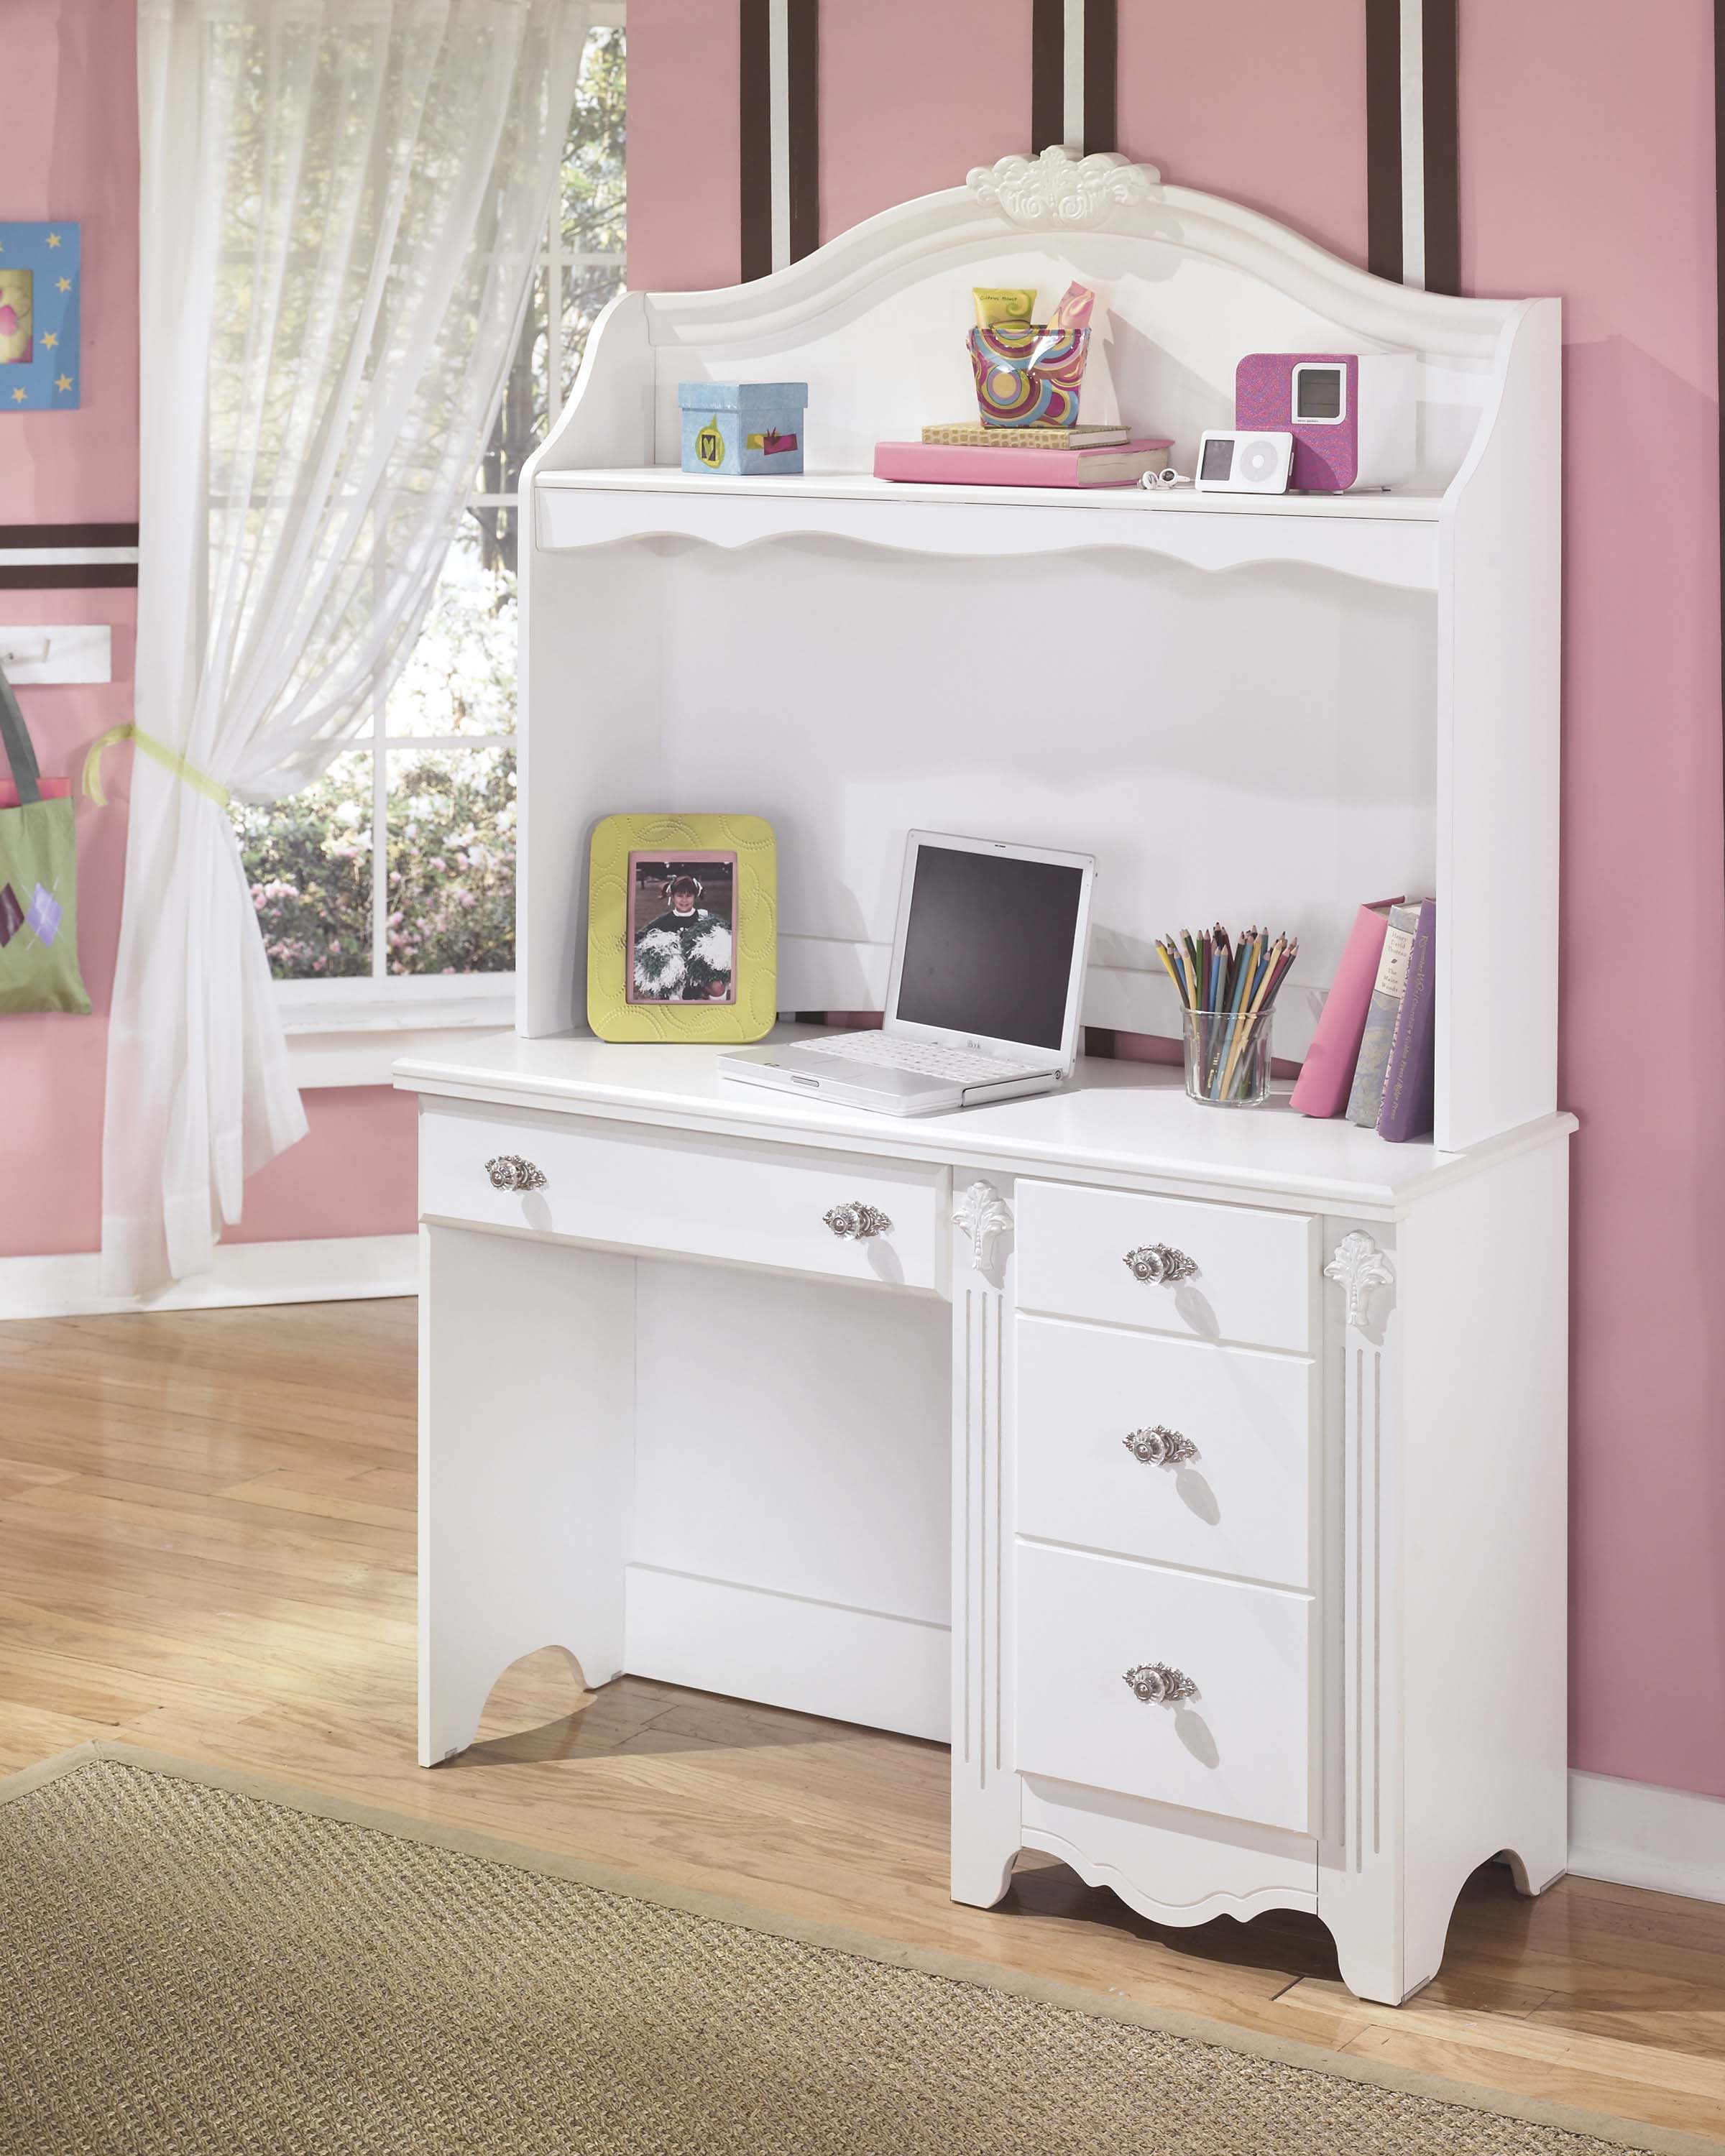 Furnituremaxx Exquisite Youth Wood Bedroom Desk w/ Hutch in White Color